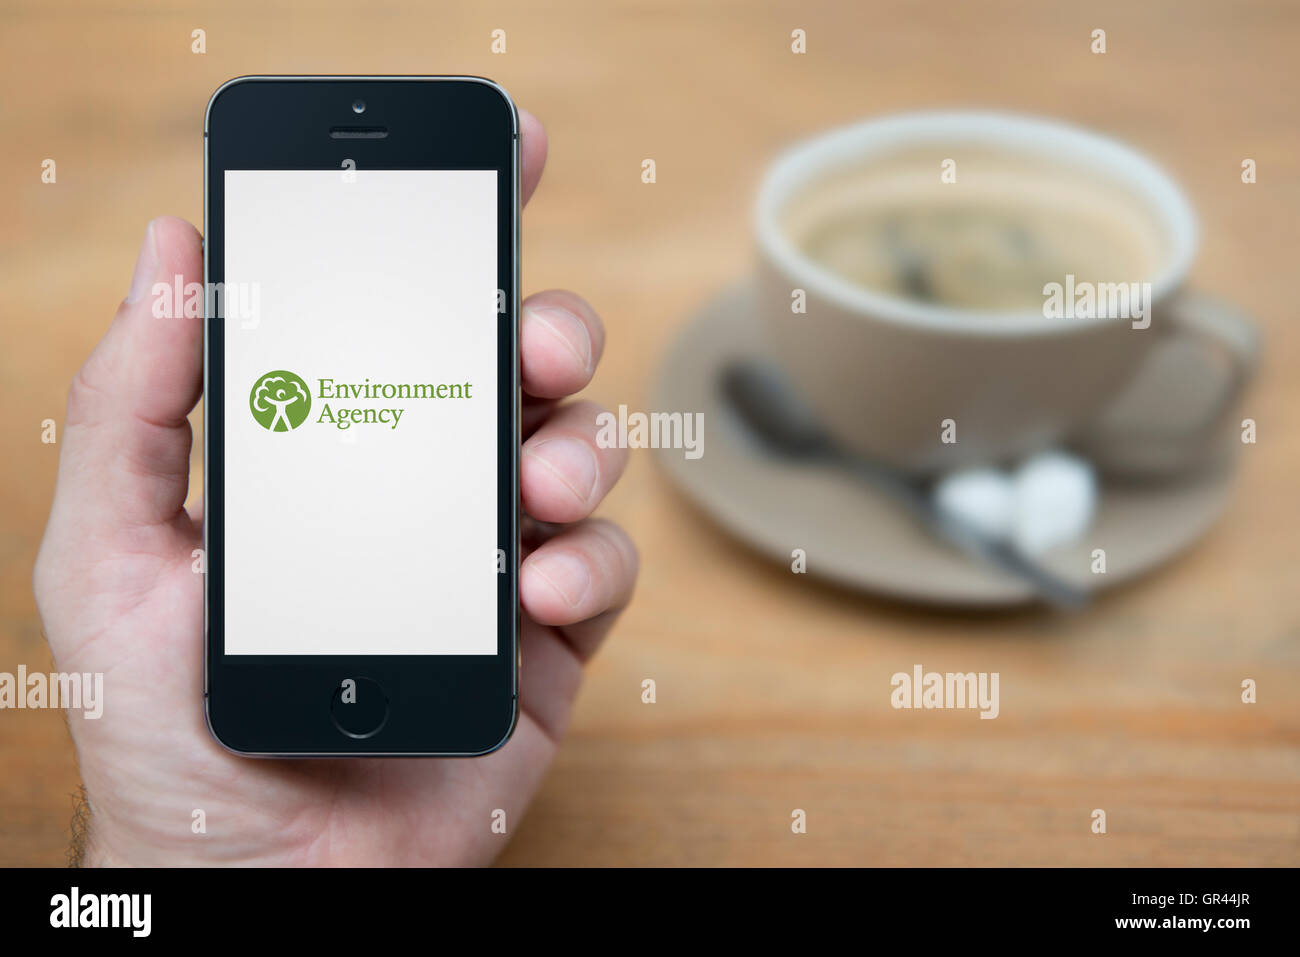 A man looks at his iPhone which displays the Environment Agency logo  (Editorial use only). Stock Photo